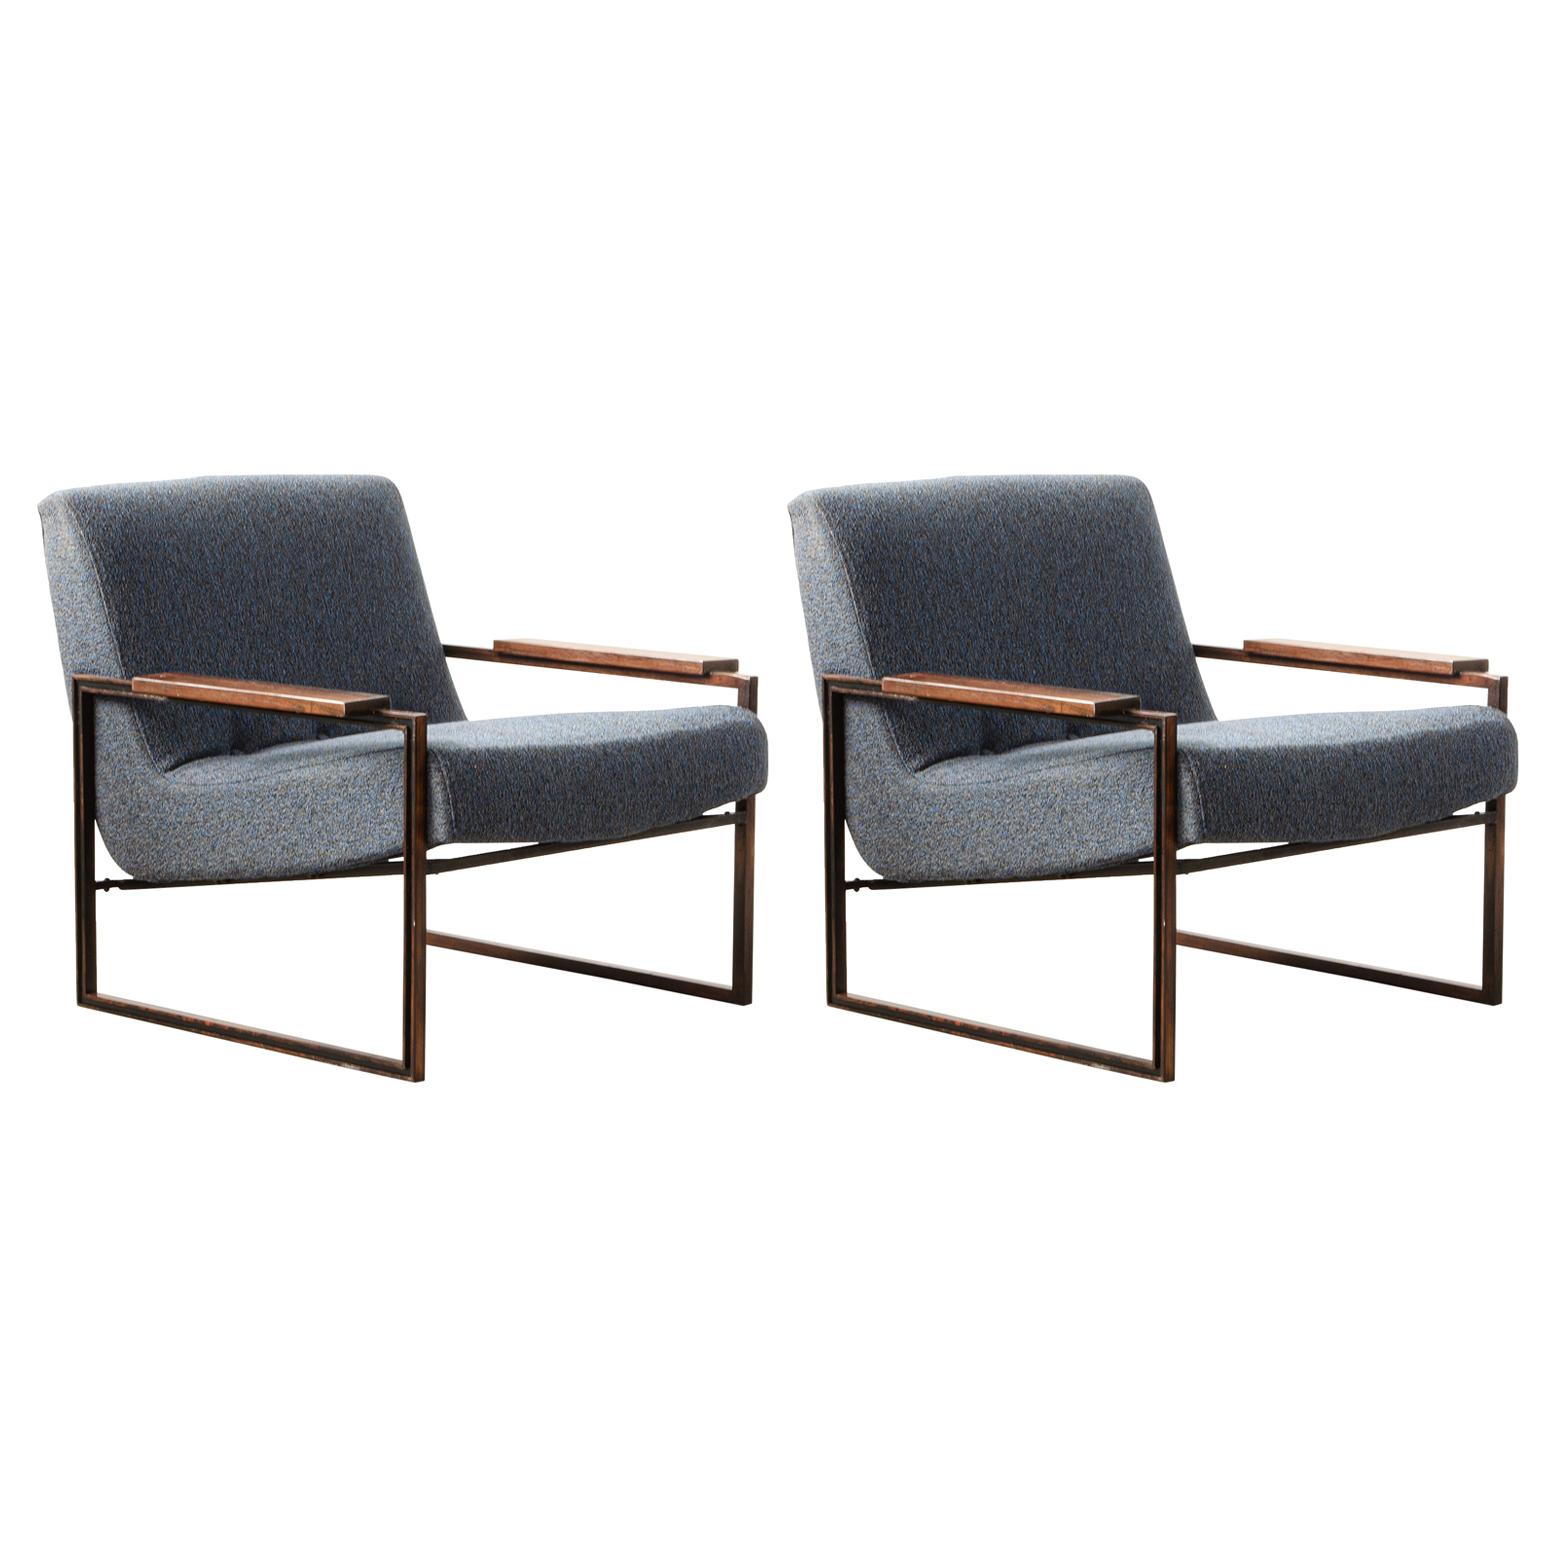 Pair of "MP-05" Armchair by Percival Lafer, Brazilian Mid-Century Modern